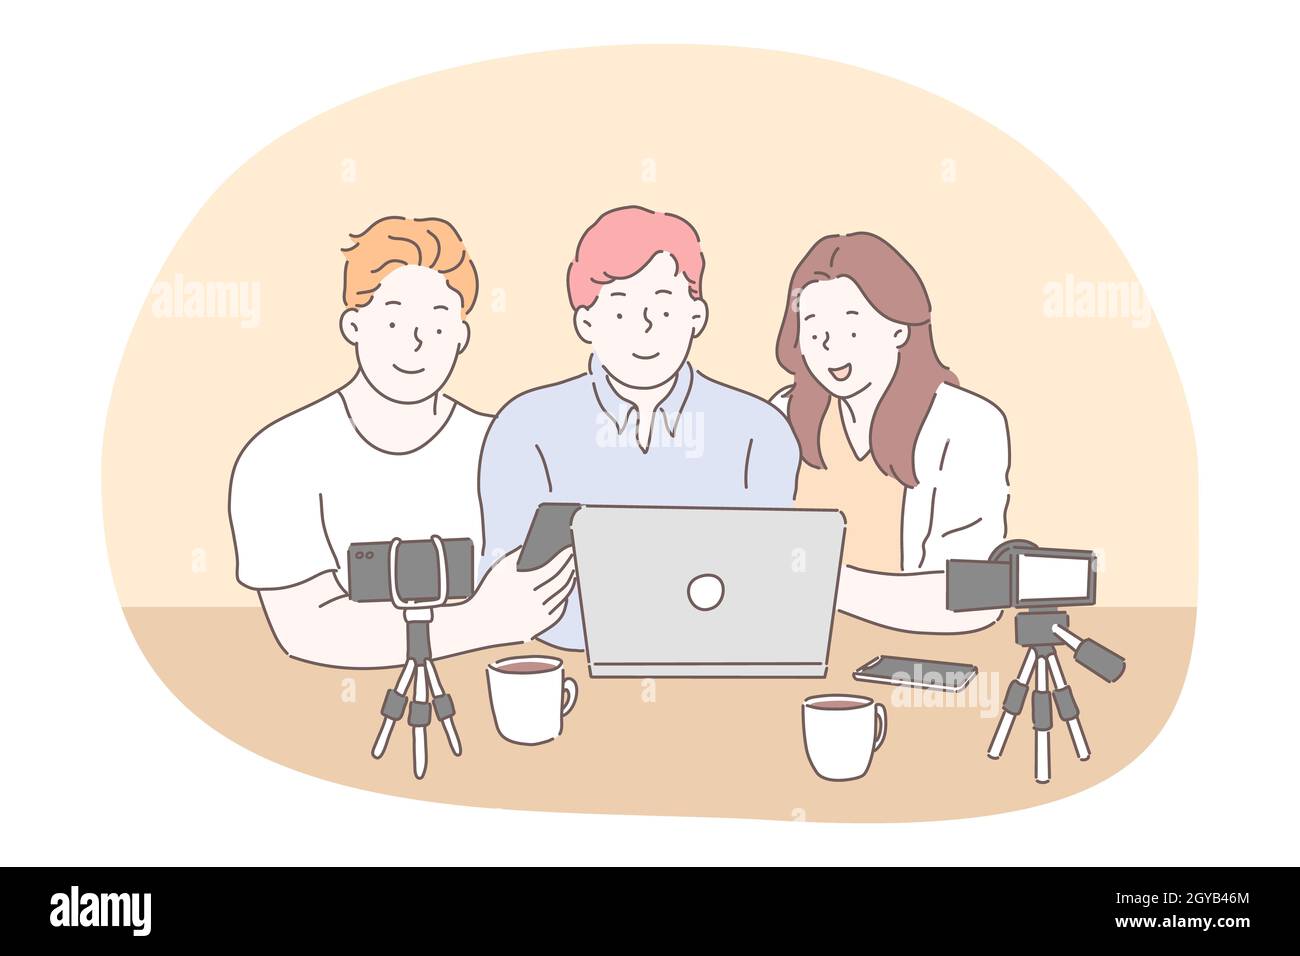 Blogging, vlogging, sharing video content online concept. Teen boys and girl cartoon characters sitting with smartphone cameras on tripods and laptop Stock Photo